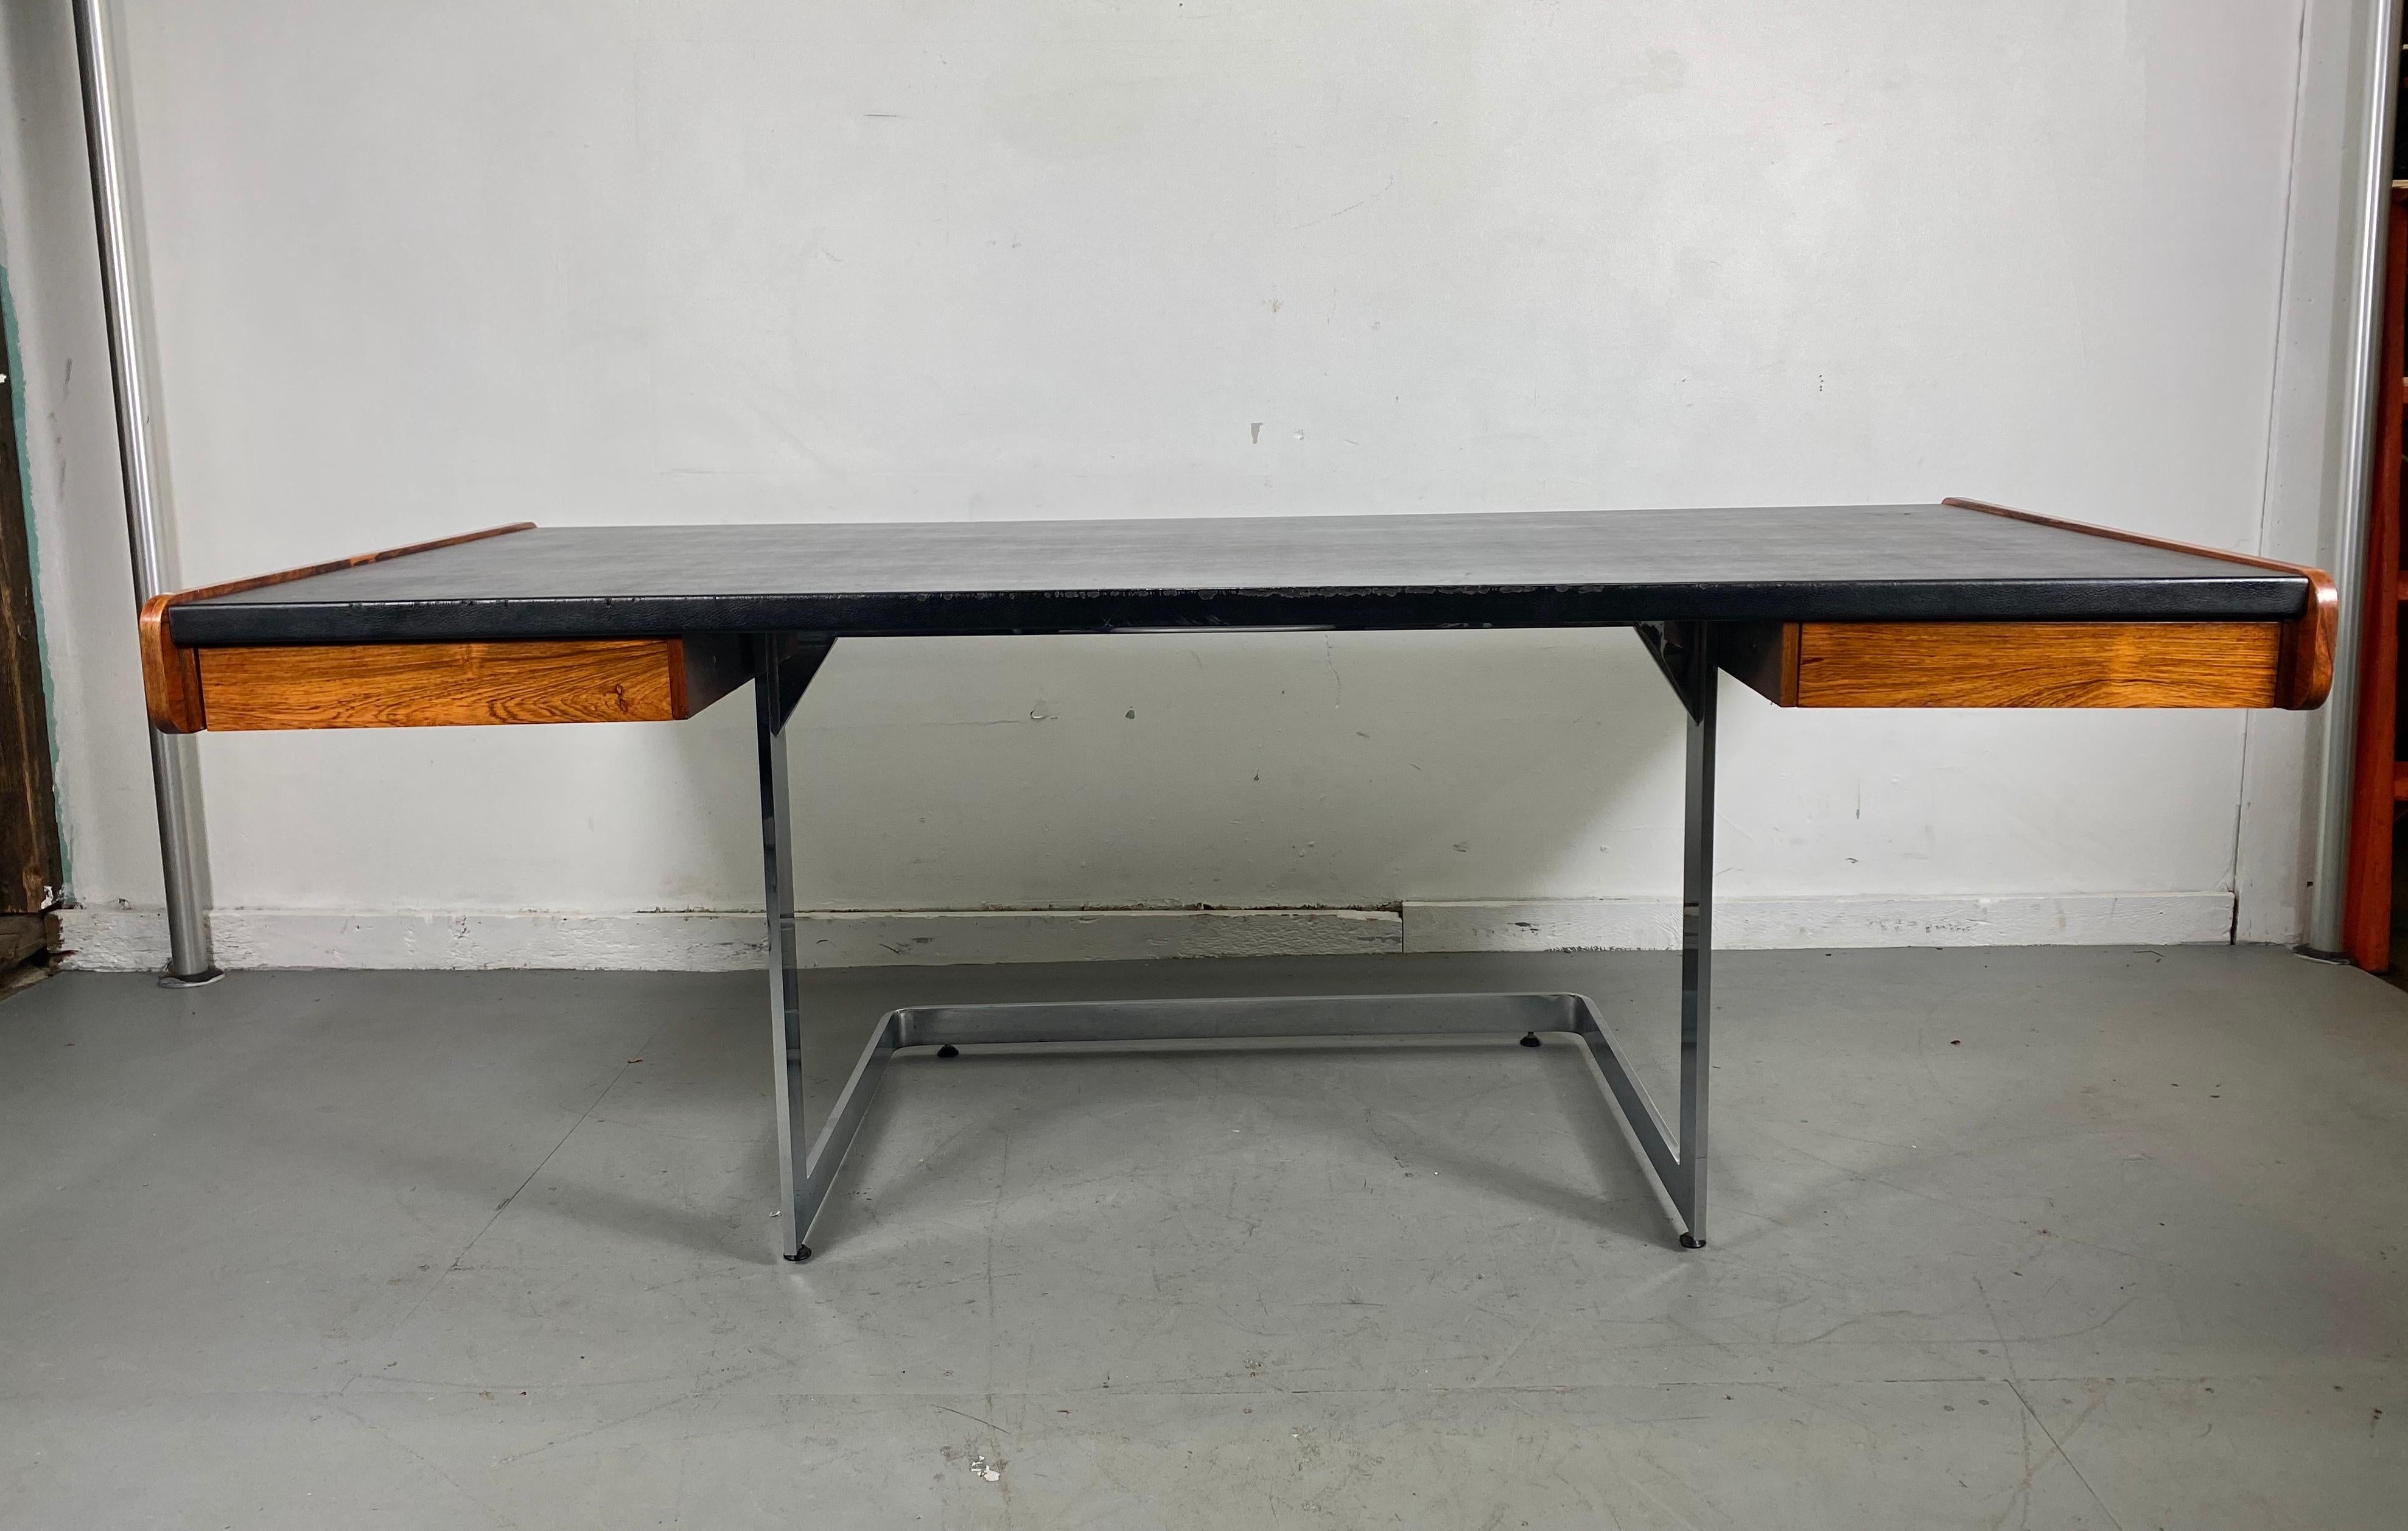 Stunning 1970s modernist desk on floating chrome base by Ste. Marie Laurent, leather top. Rosewood sides and drawers, retains original label in drawer, minor leather edge wear, (see photo), amazing design, Classic pop modern.